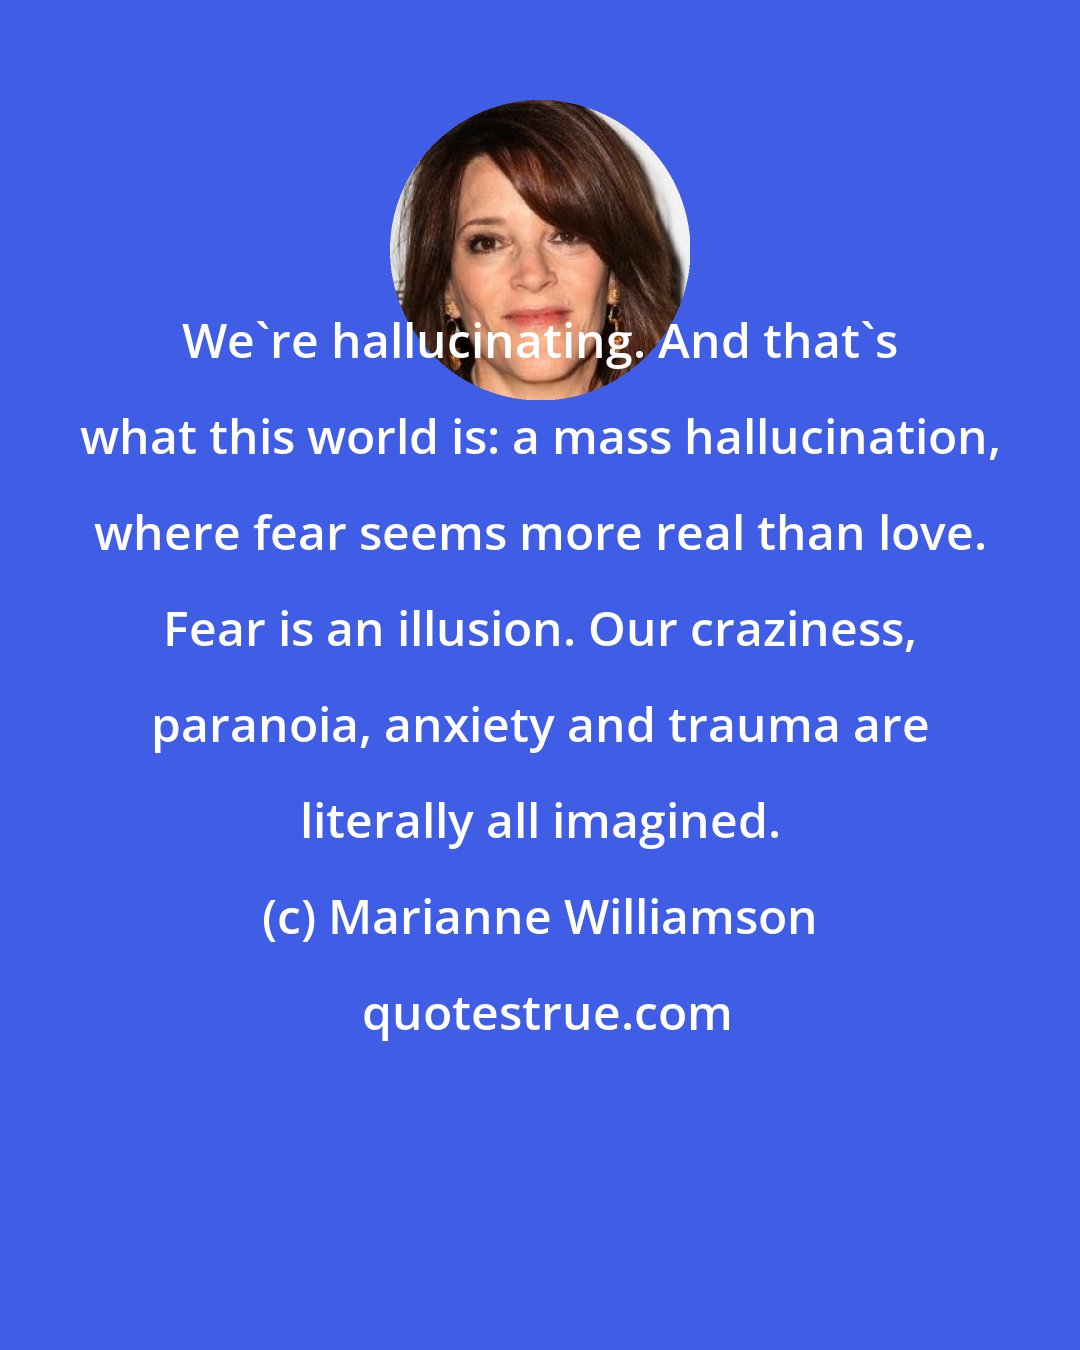 Marianne Williamson: We're hallucinating. And that's what this world is: a mass hallucination, where fear seems more real than love. Fear is an illusion. Our craziness, paranoia, anxiety and trauma are literally all imagined.